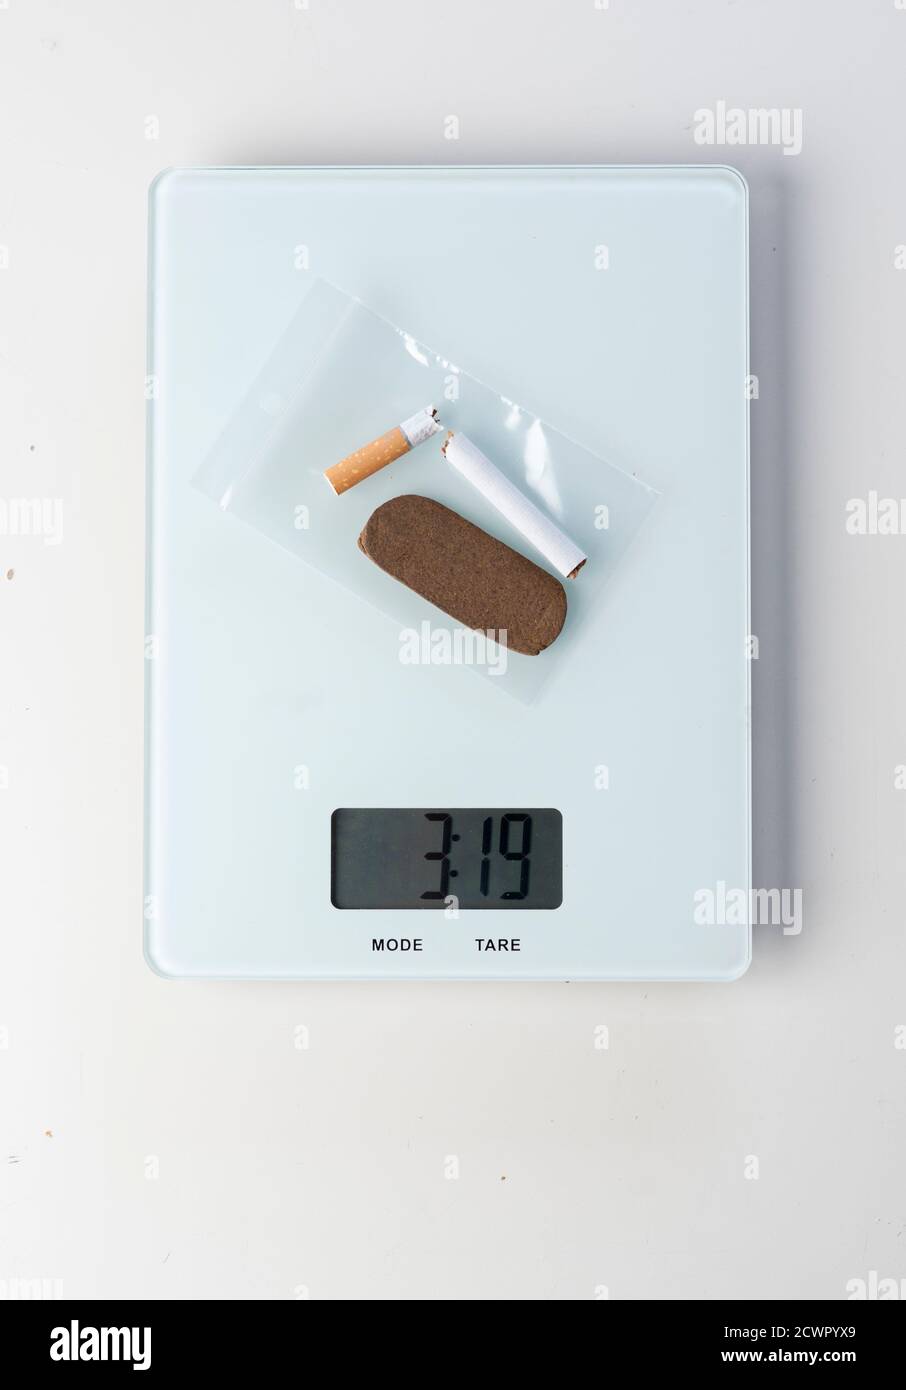 https://c8.alamy.com/comp/2CWPYX9/medical-hashis-in-the-kingdom-of-morocco-cbd-medical-moroccan-cannabis-hashish-in-plastic-bag-background-prepared-cigar-on-top-of-weight-scale-2CWPYX9.jpg